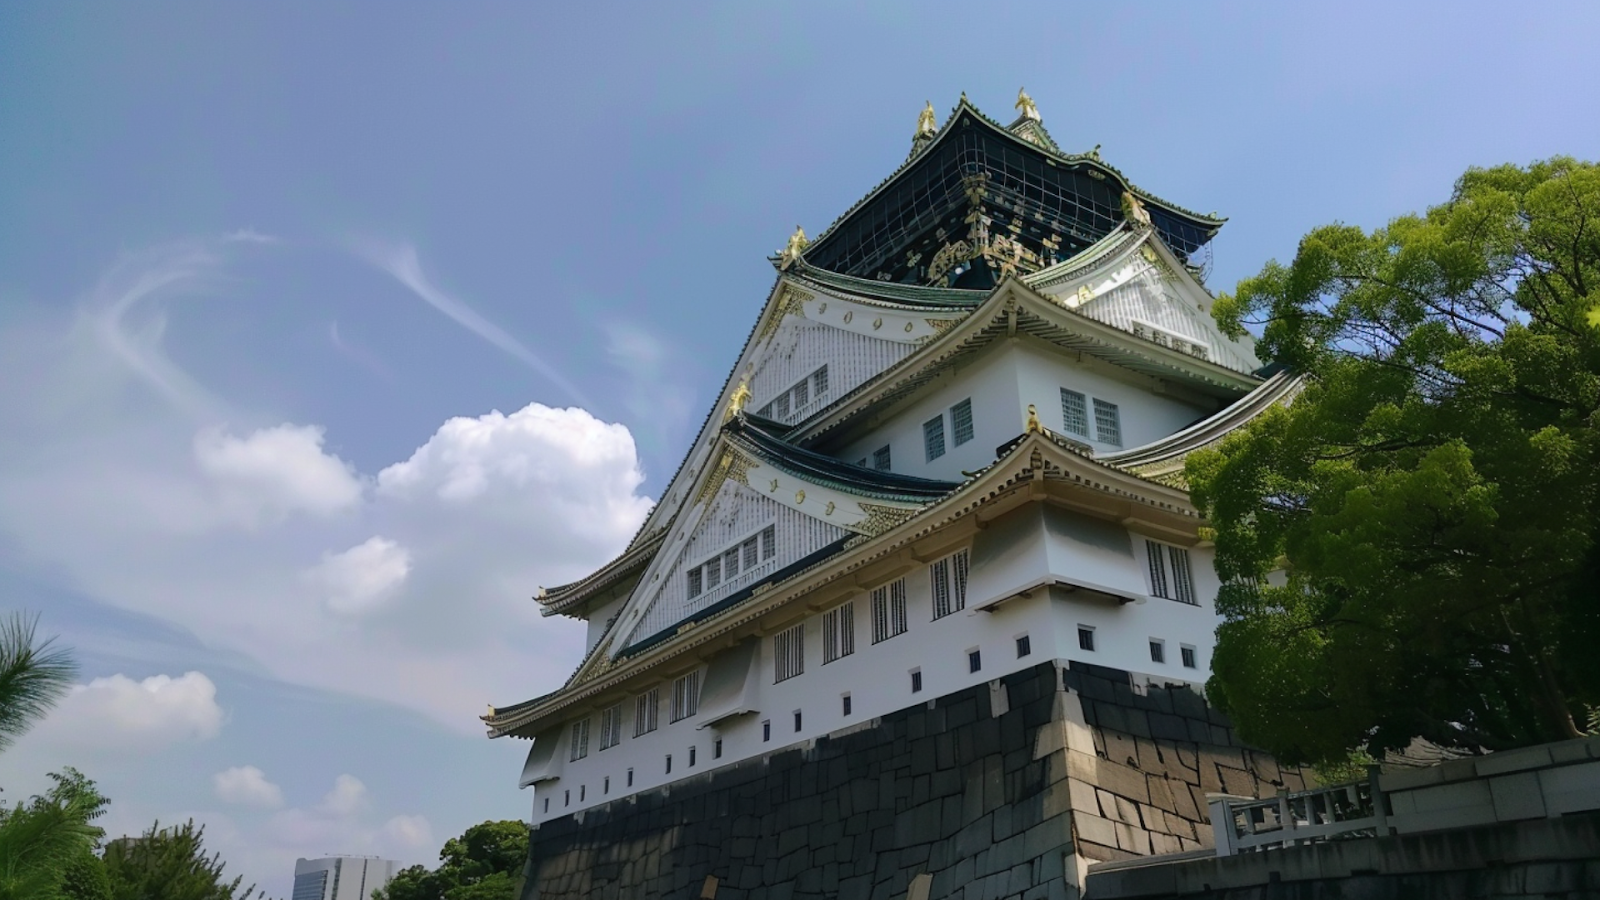 Low-angle shot of the Osaka Castle taken during summer in Japan